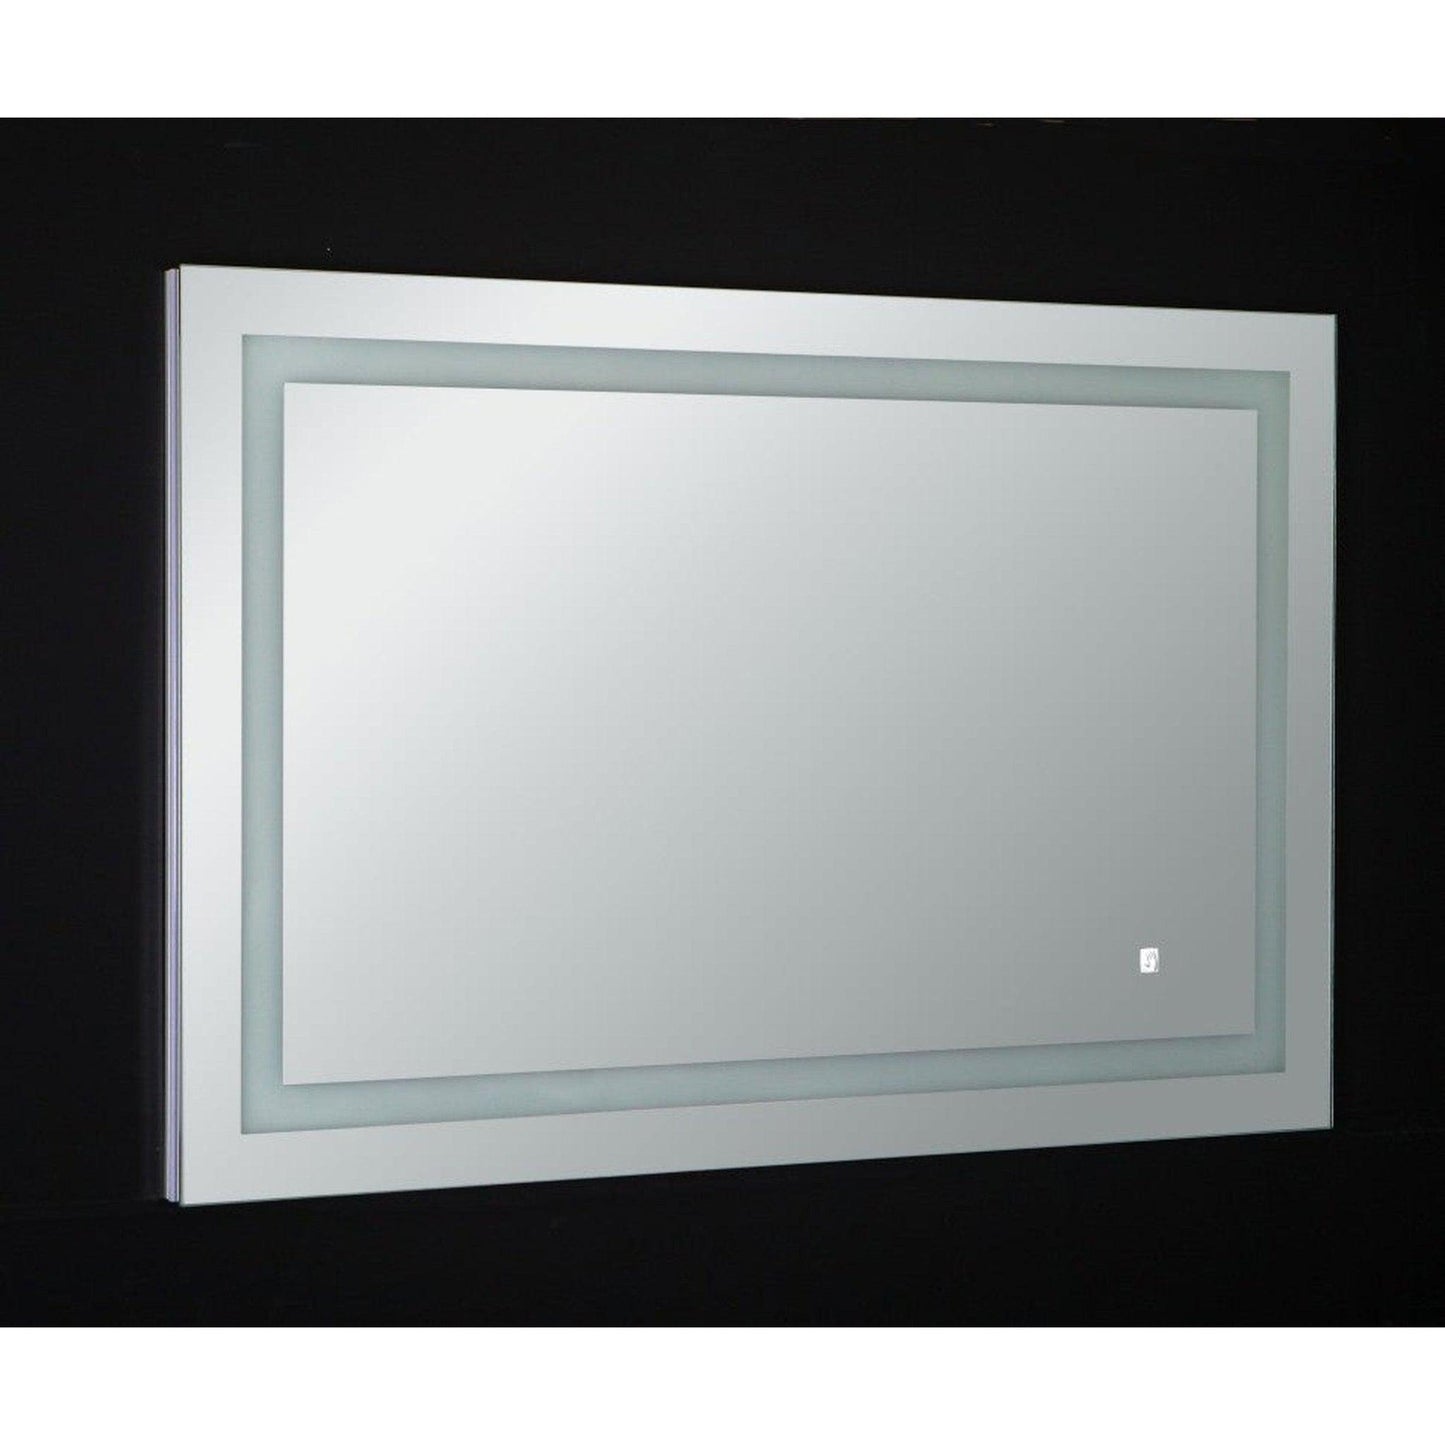 Eviva Deco Piece 24" x 30" Wall Mounted Bathroom Vanity Mirror with Backlit LED and Frame Lights